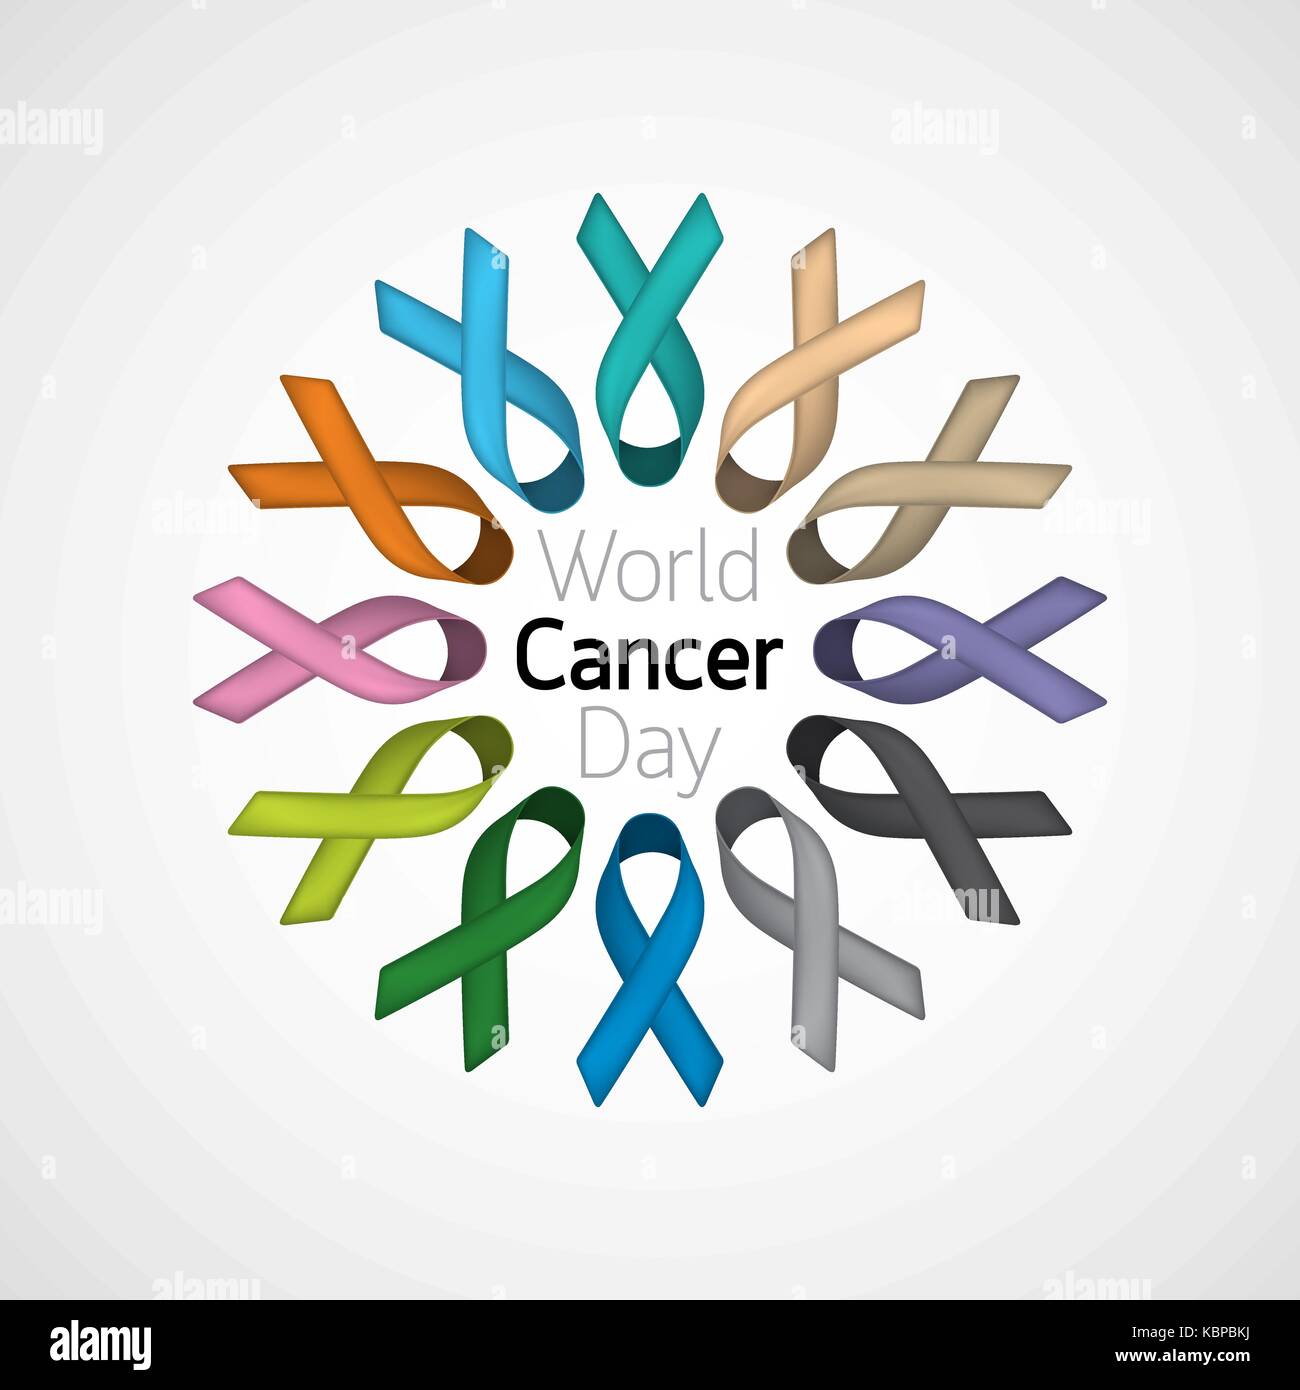 World Cancer Day vector icon illustration Stock Vector